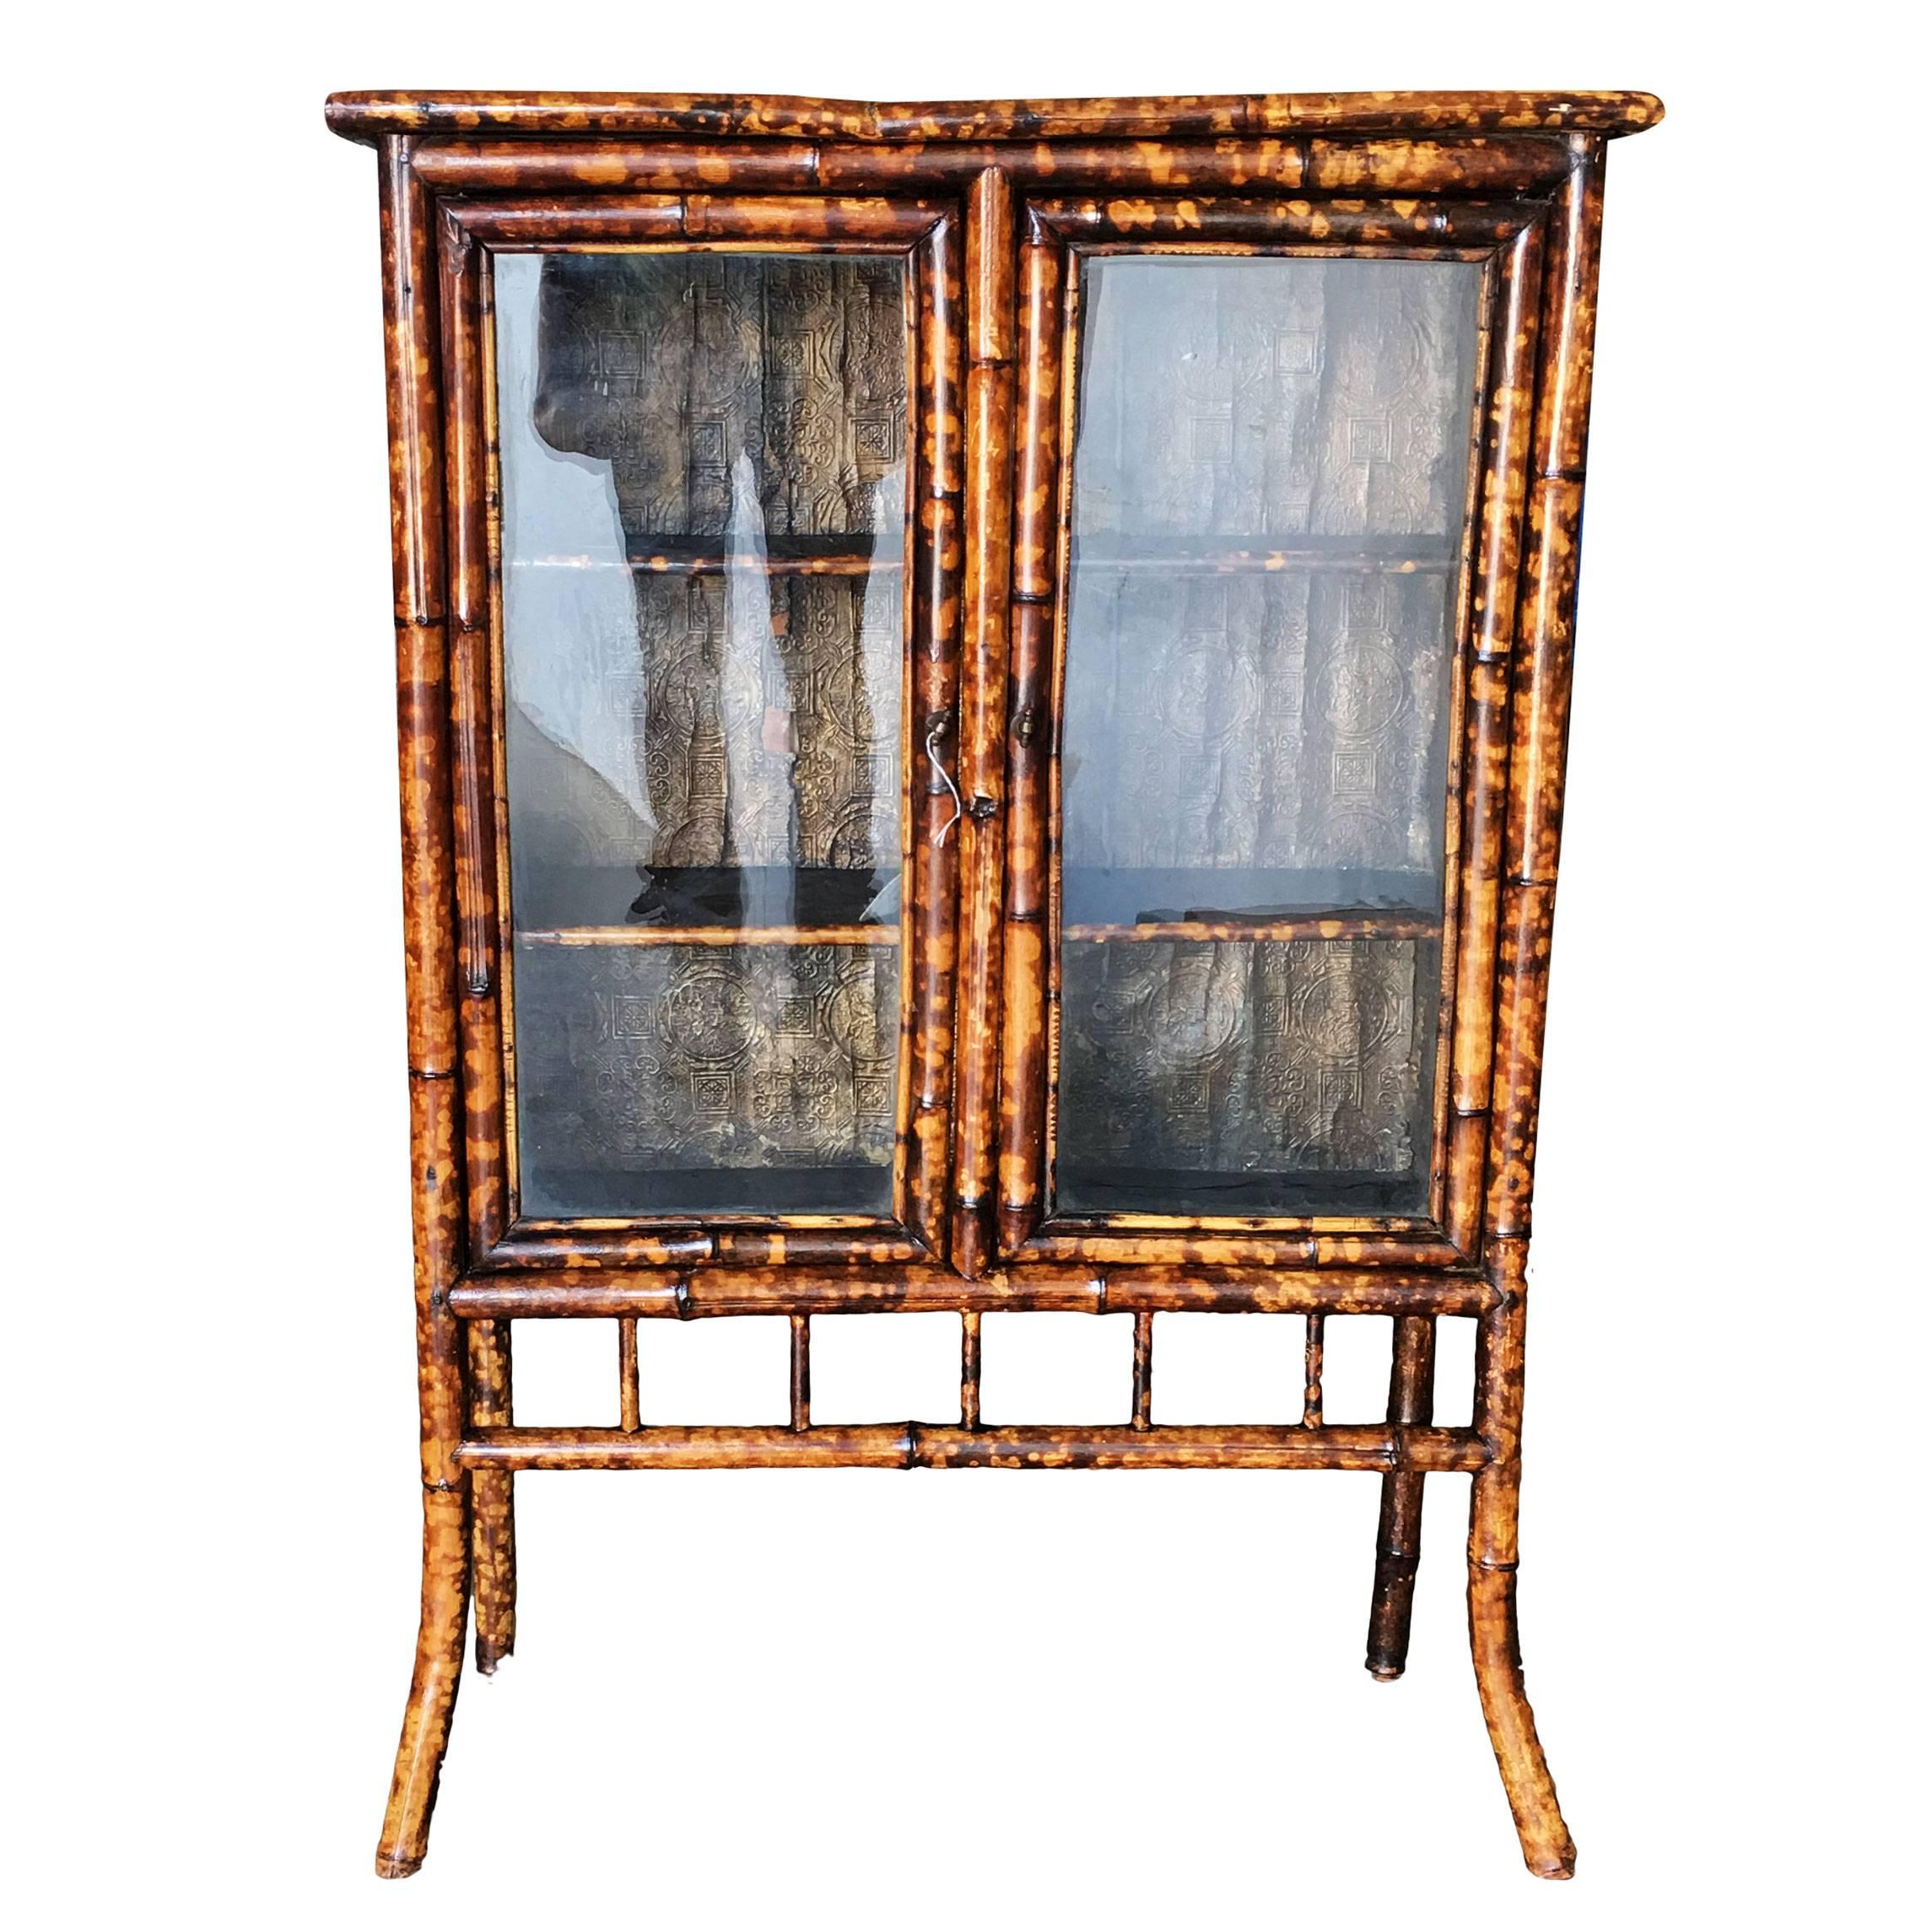 Antique three-tier shelf tiger bamboo breakfront cabinet with decorative hand-forged metal sides and two glass front doors resting on sculpted legs. 

Restored to new for you.

All rattan, bamboo and wicker furniture has been painstakingly